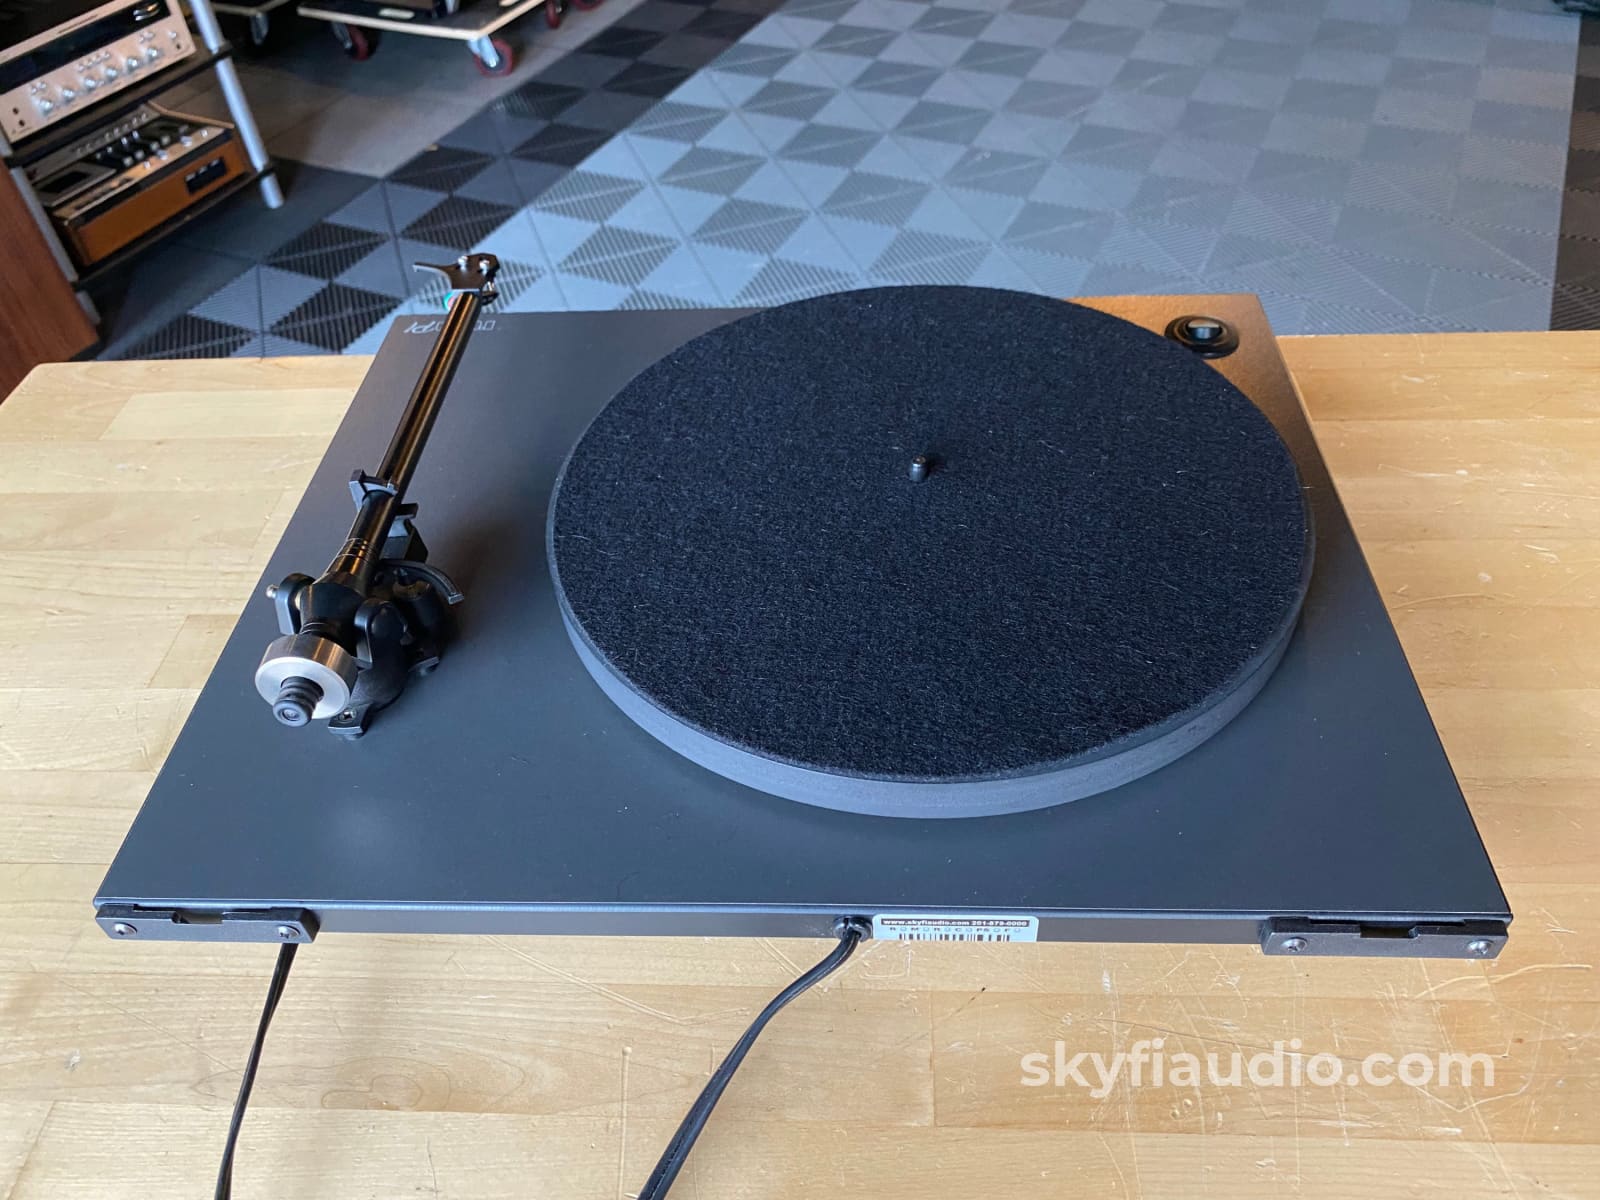 Rega Planar 1 (P1) Turntable Fitted With Ortofon Cartridge